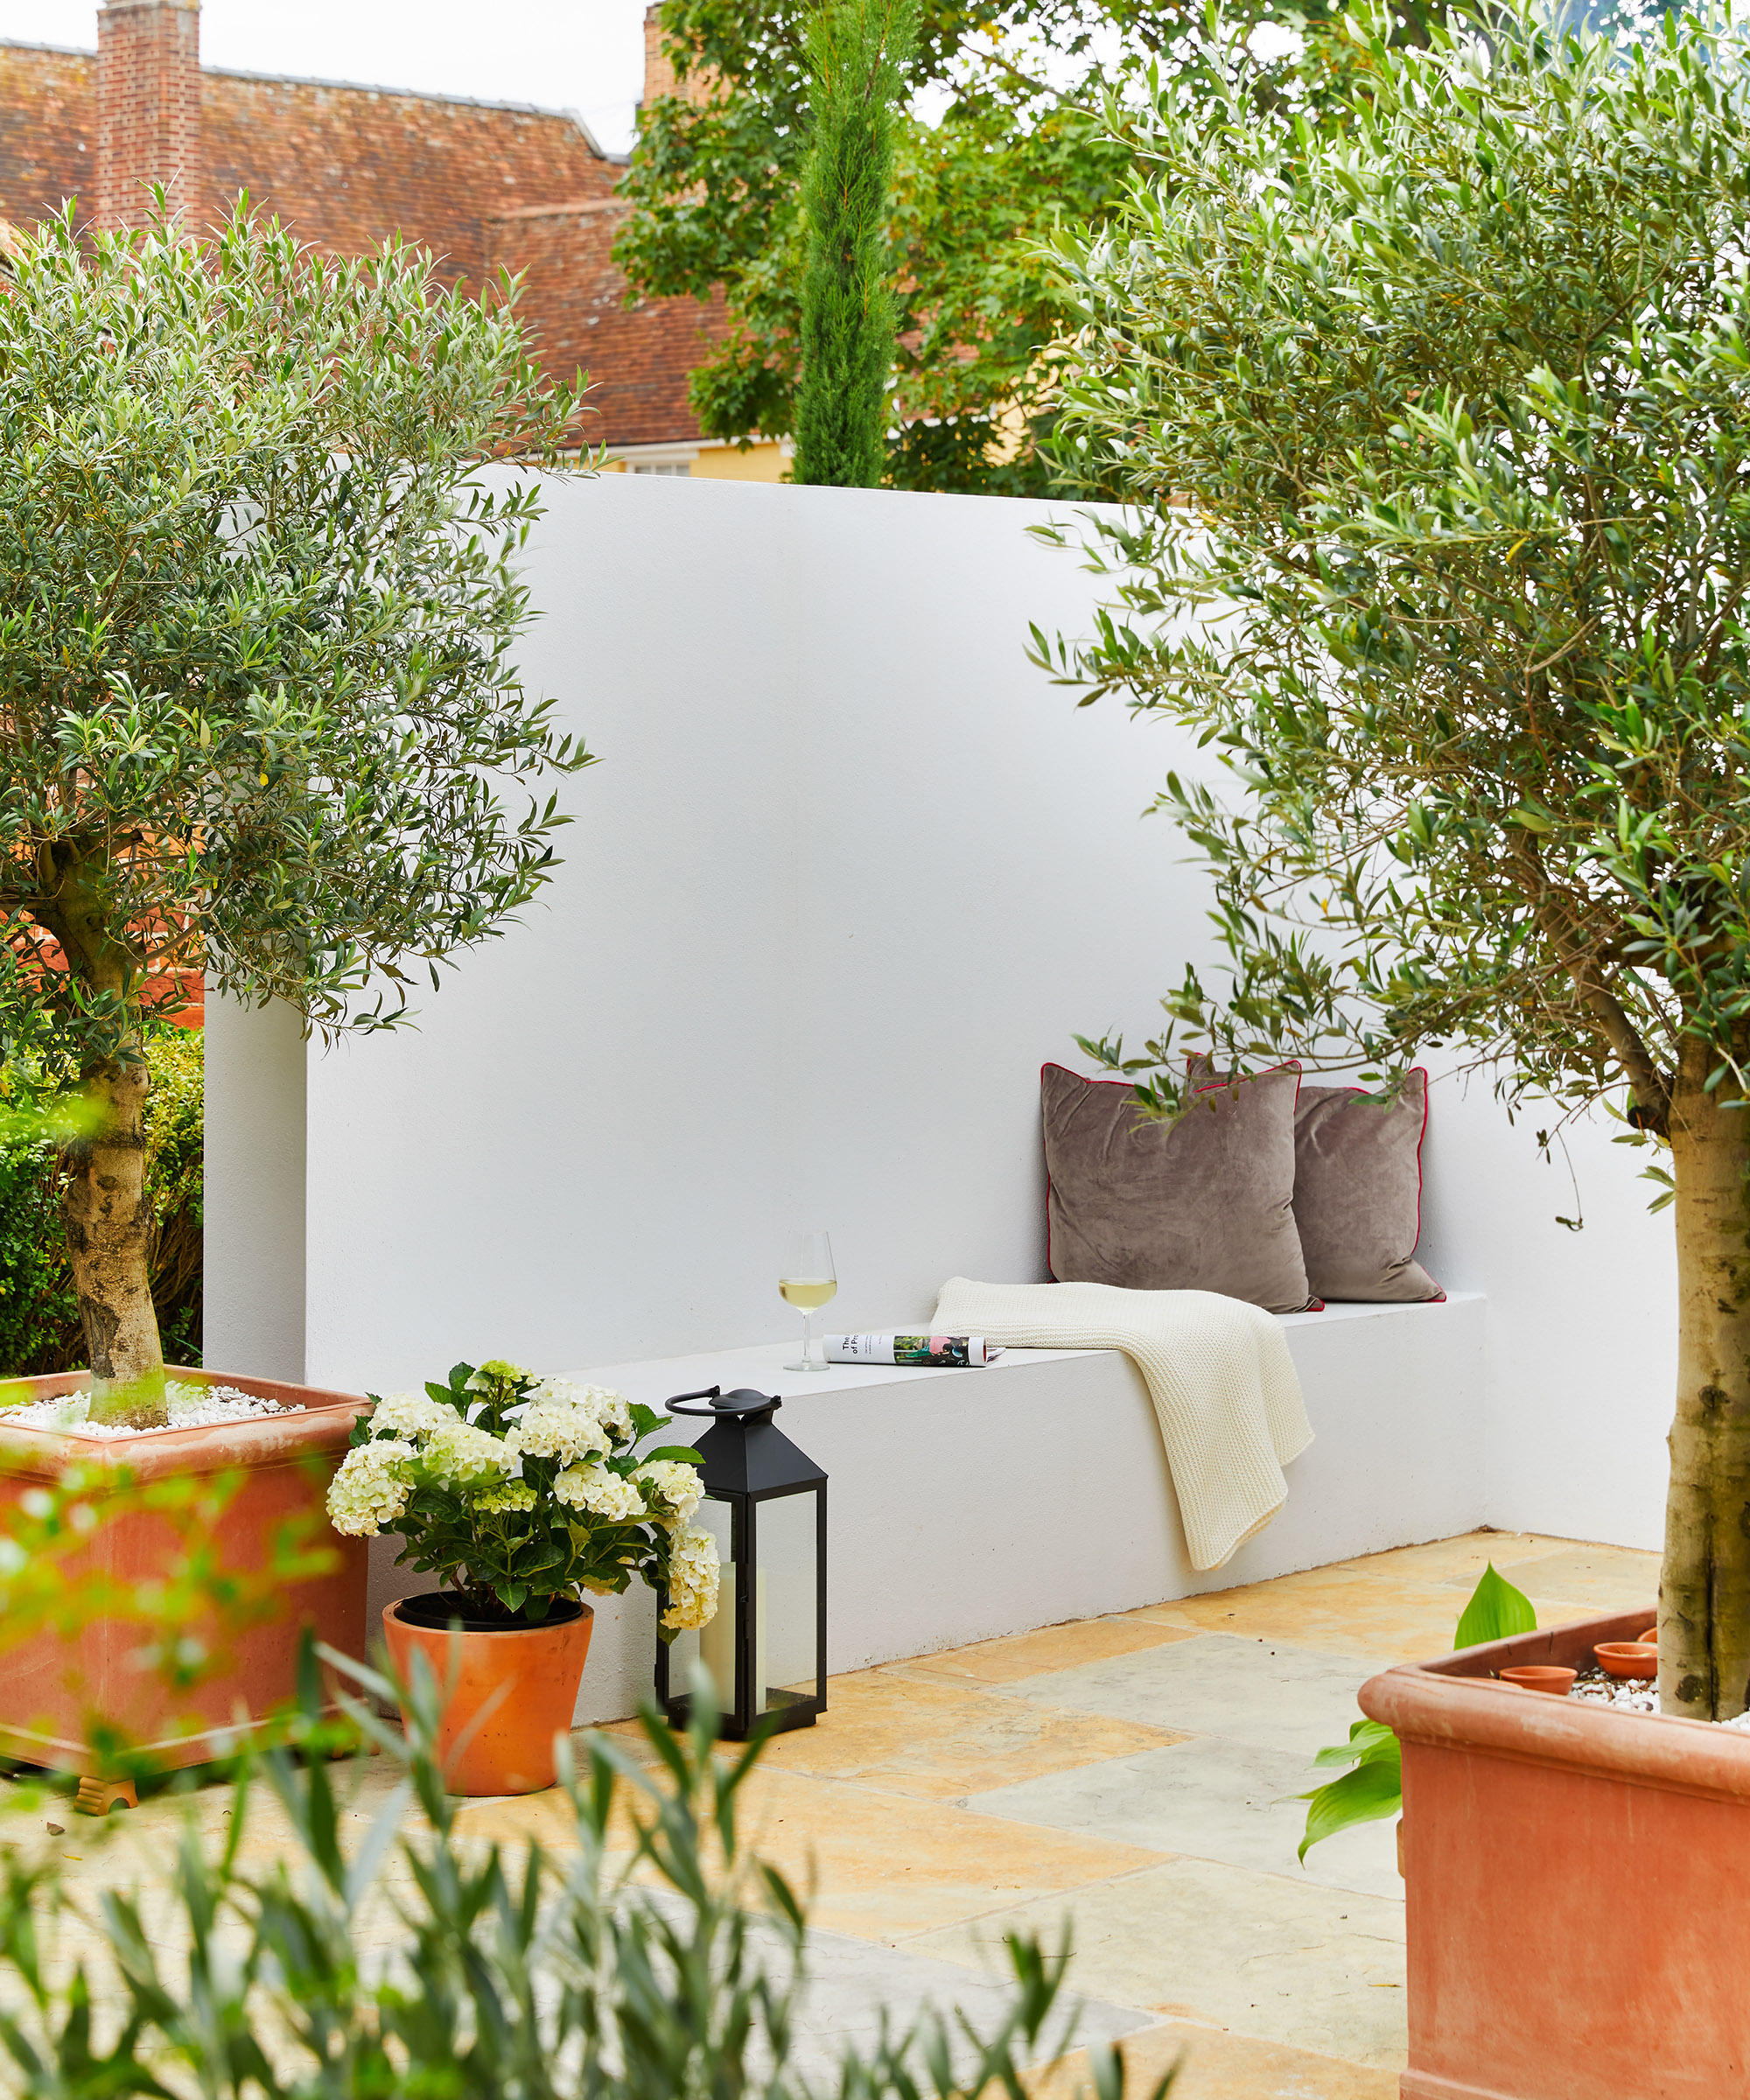 A beautiful smooth grey built in seating wall with 2 olive trees in terracotta pots